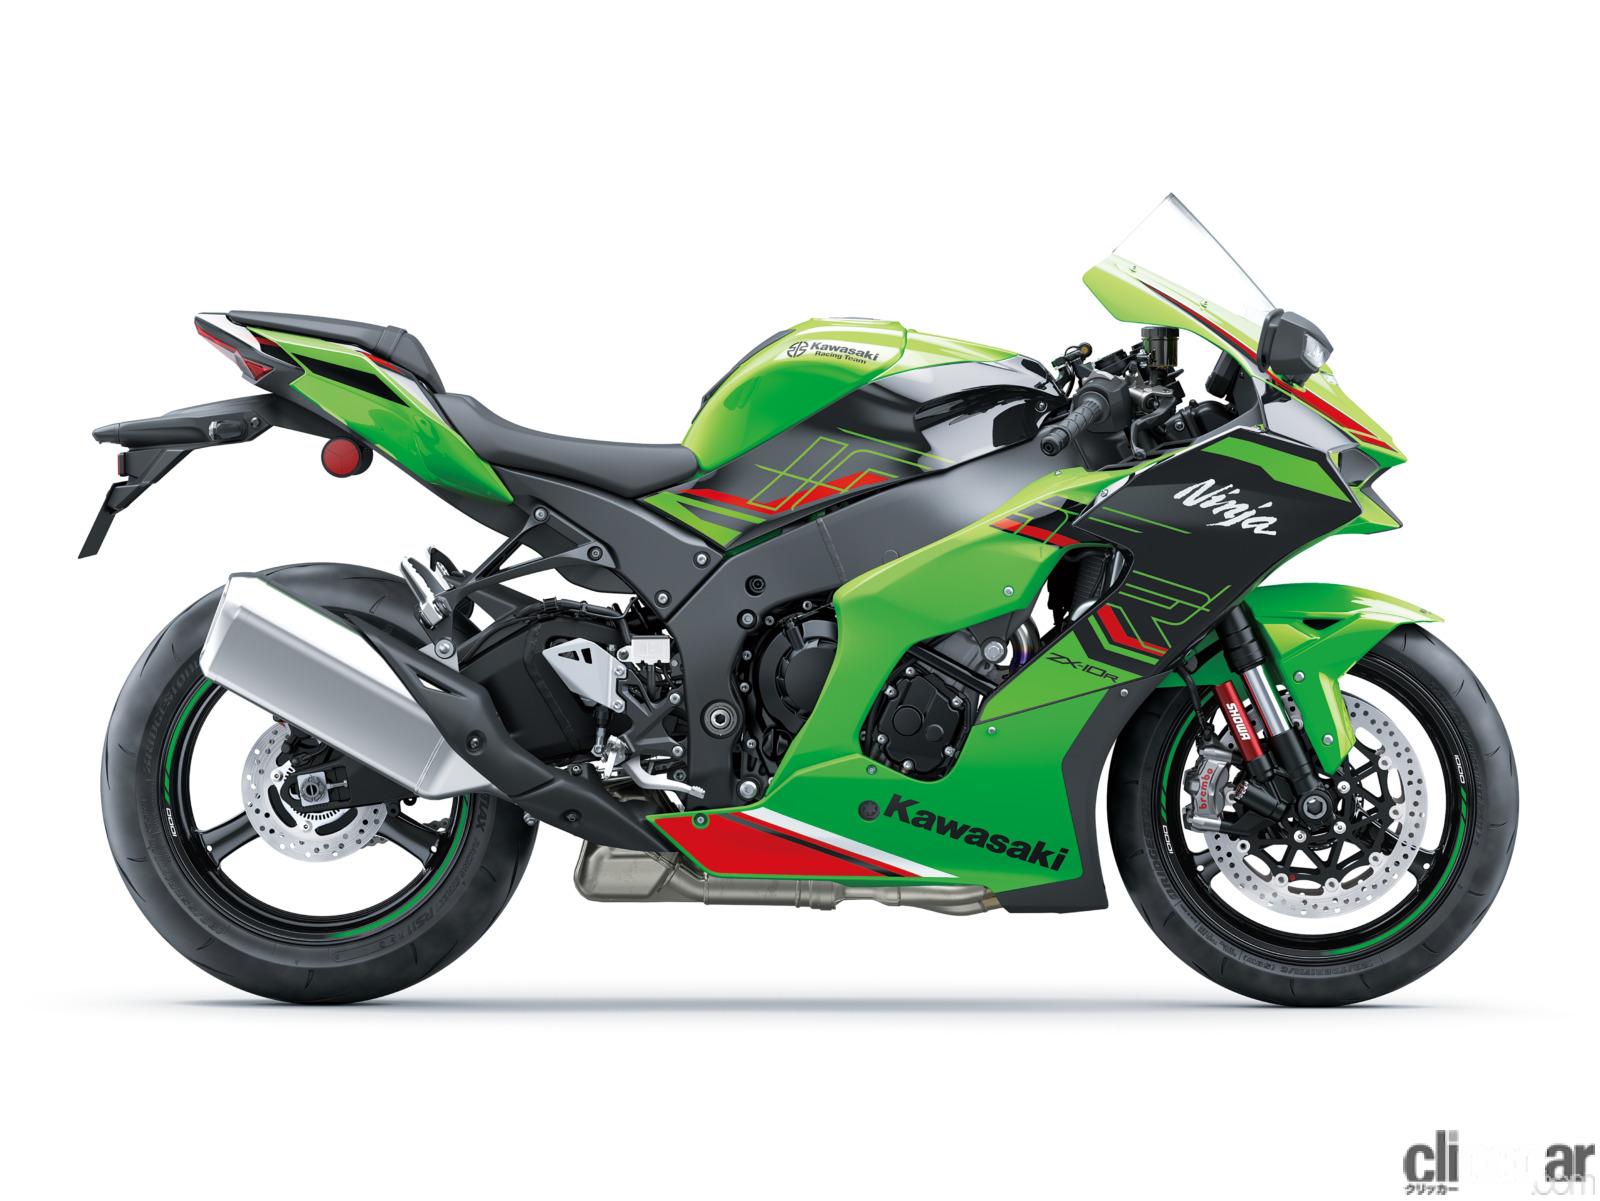 ZX-10R 車検残1年7ヶ月 - カワサキ